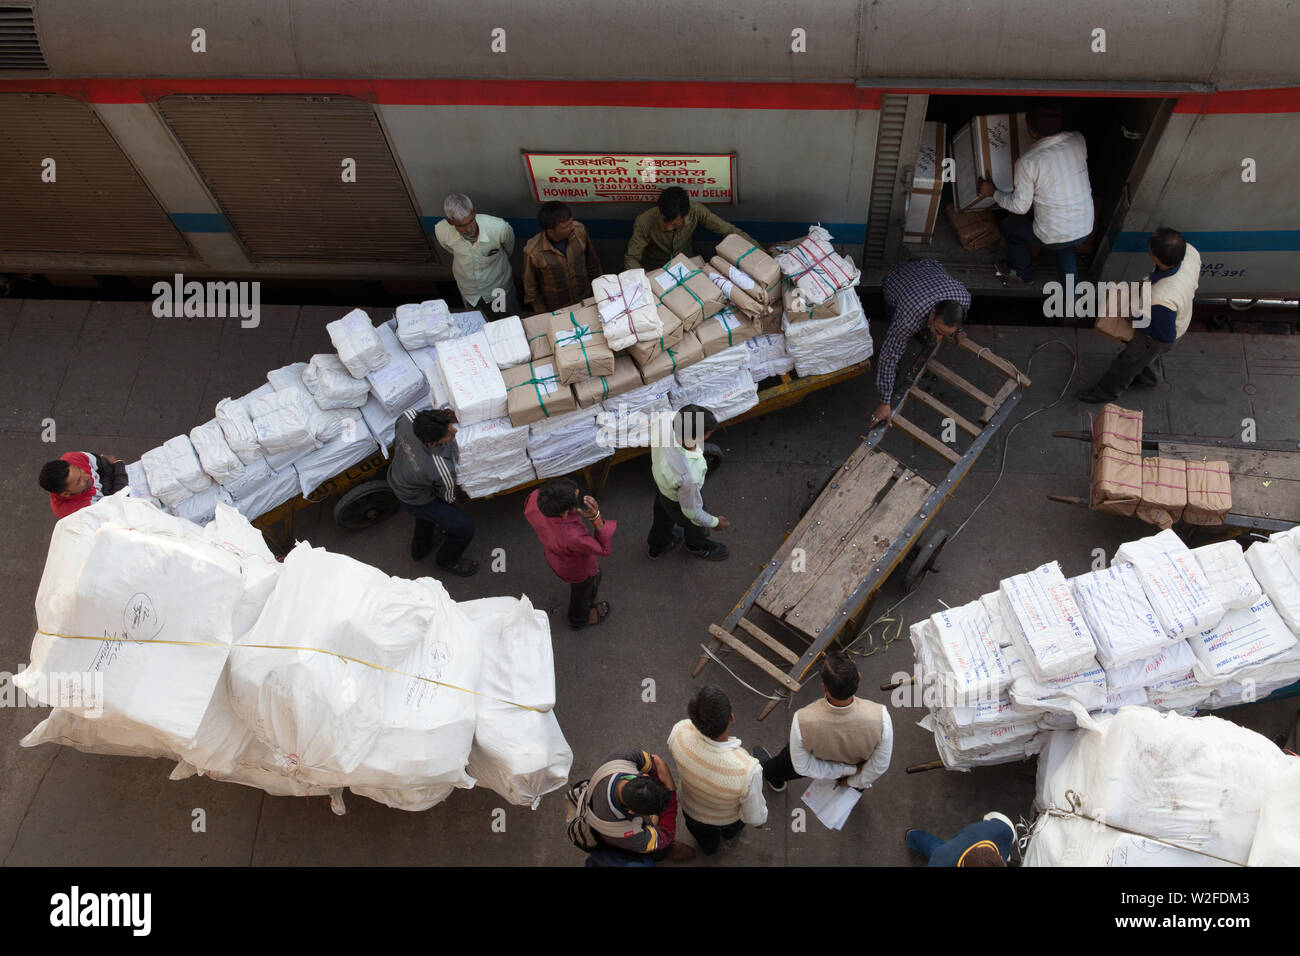 Porters load packets and parcels onto the goods carriage of a train at New Delhi railway station Stock Photo